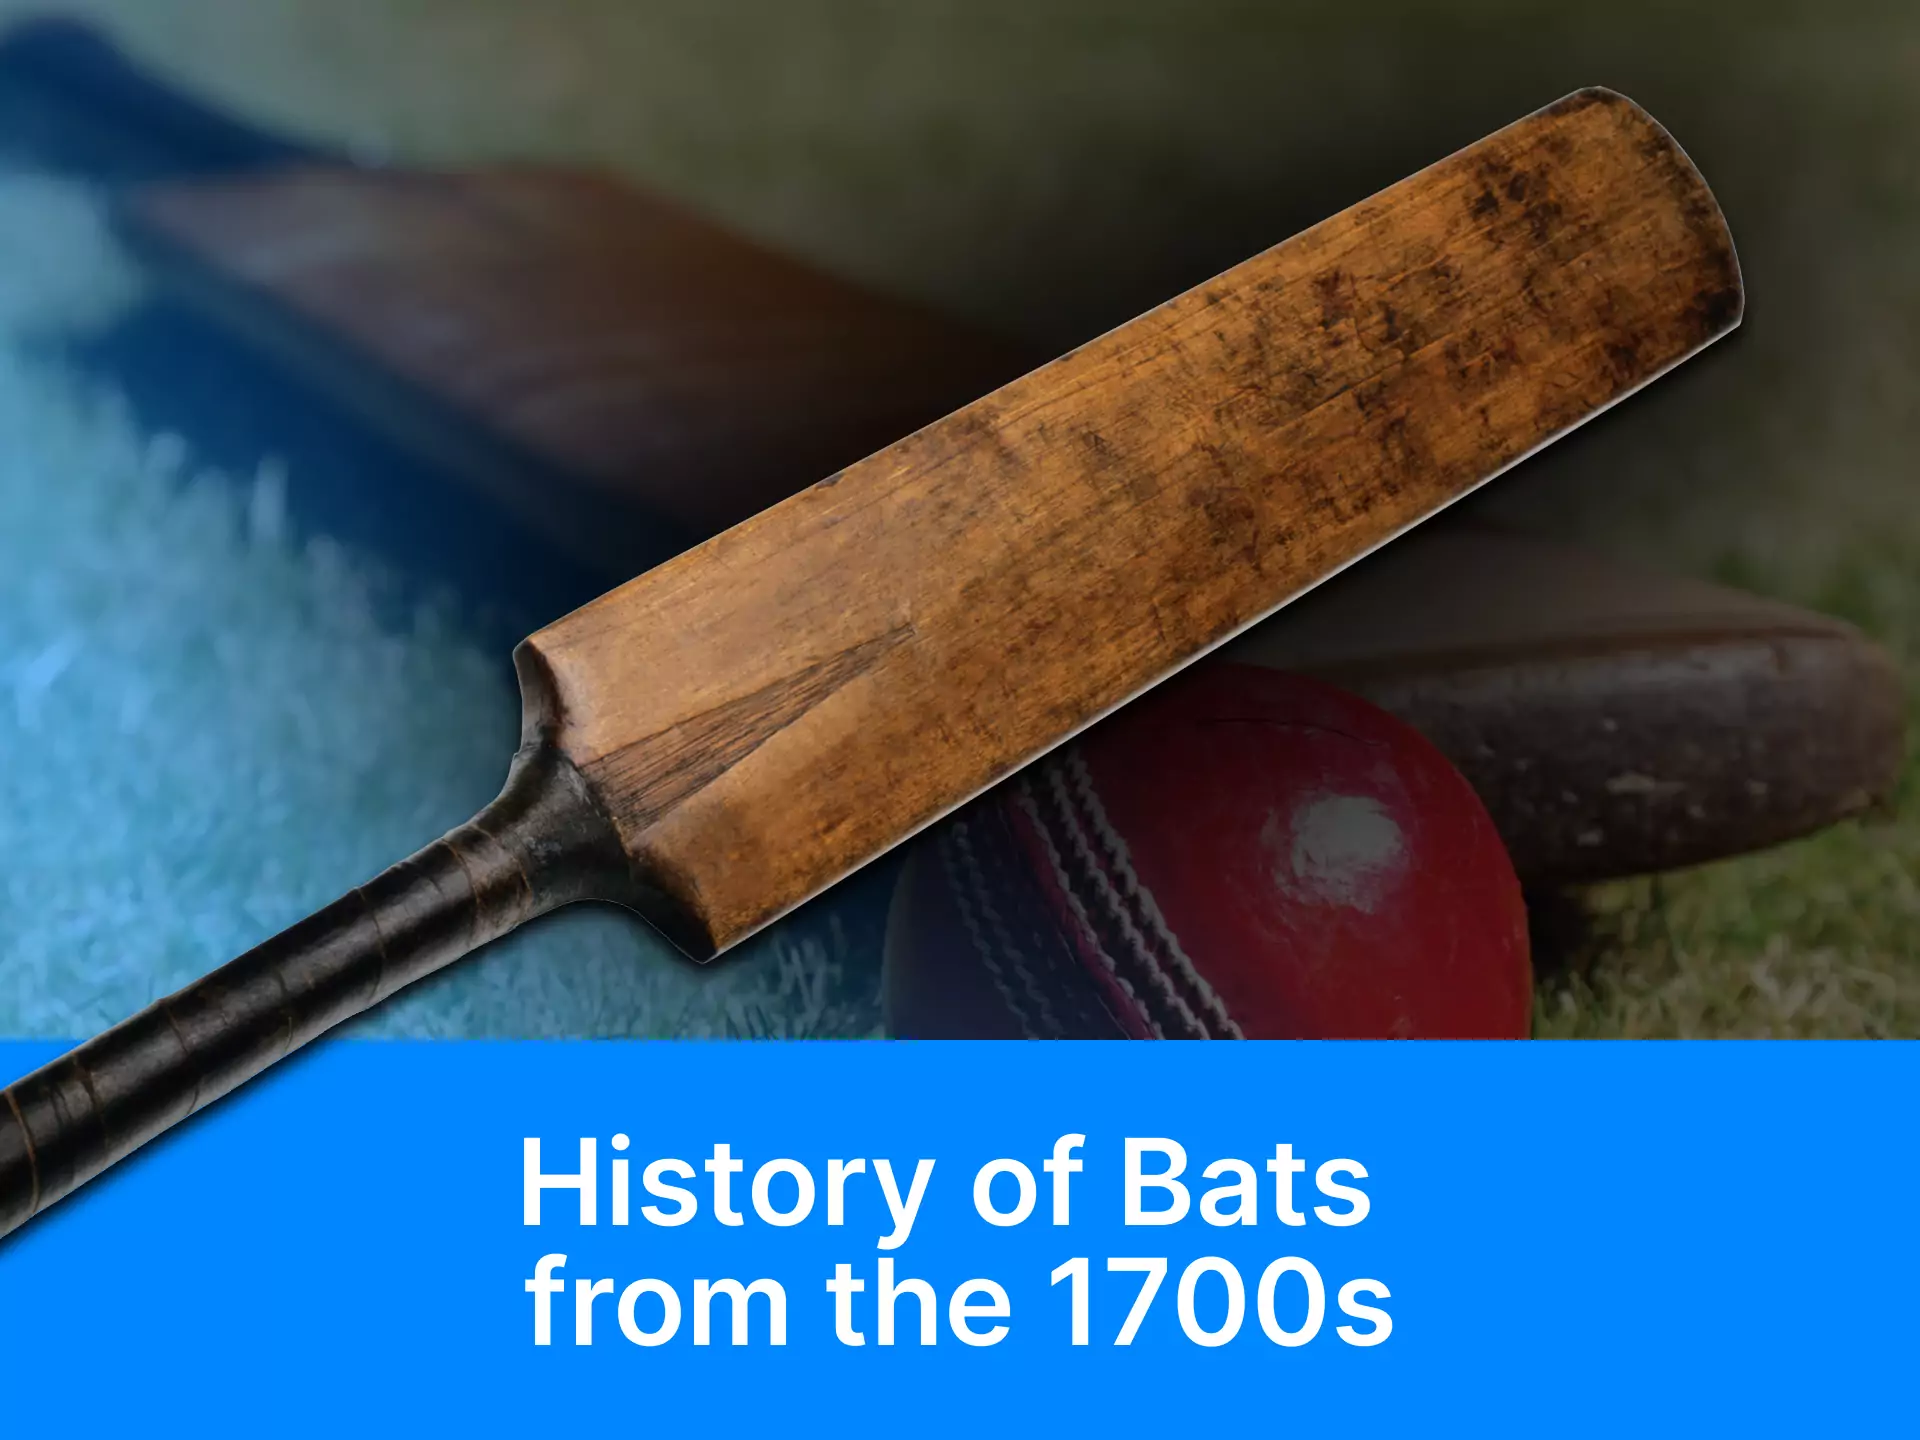 Learn about the oldest cricket bats from the 1700s.